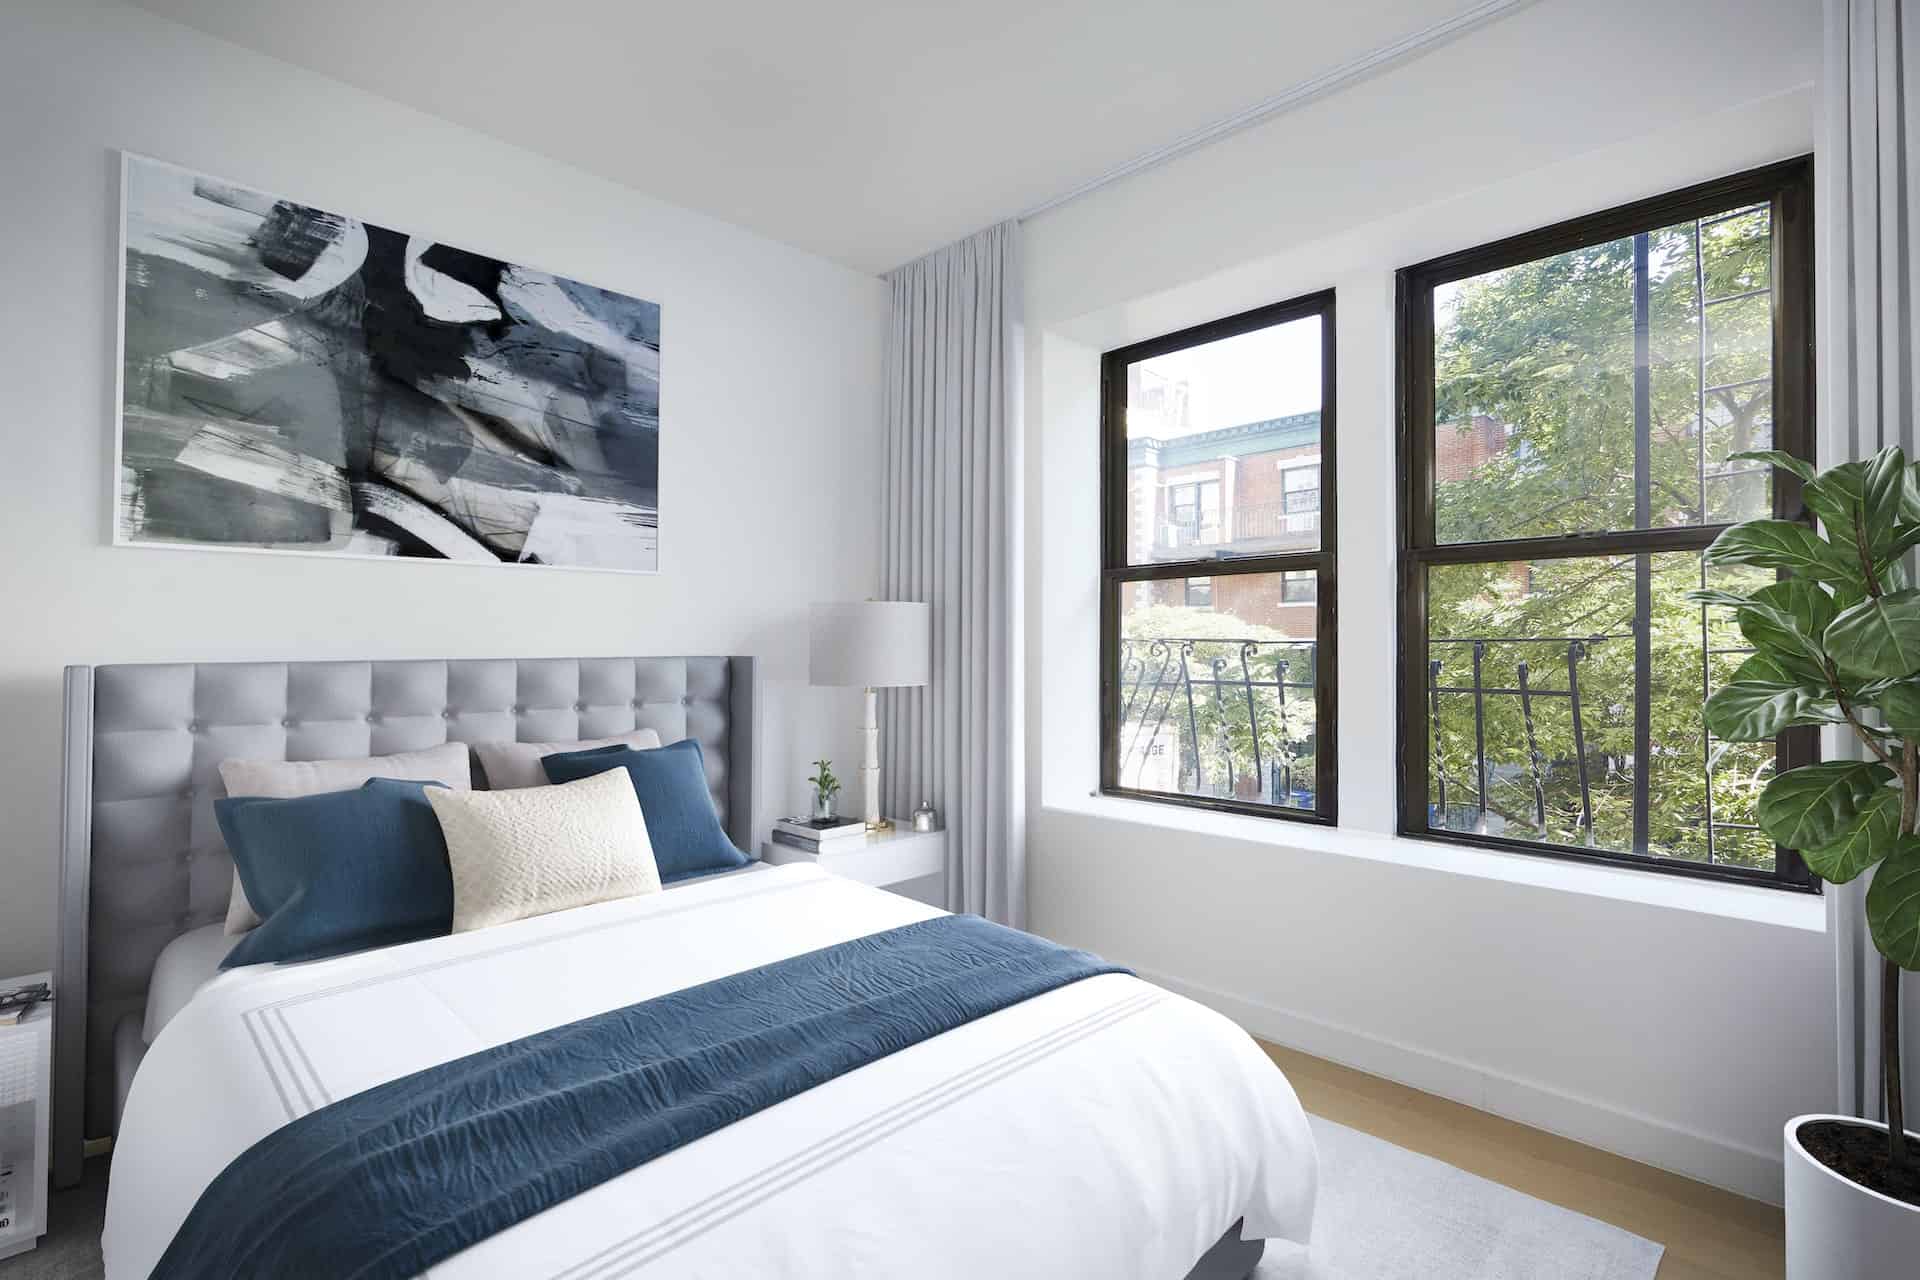 Bedroom at 634 East 11th Street apartments in New York. Queen bed with headboard, matching side tables and large windows.